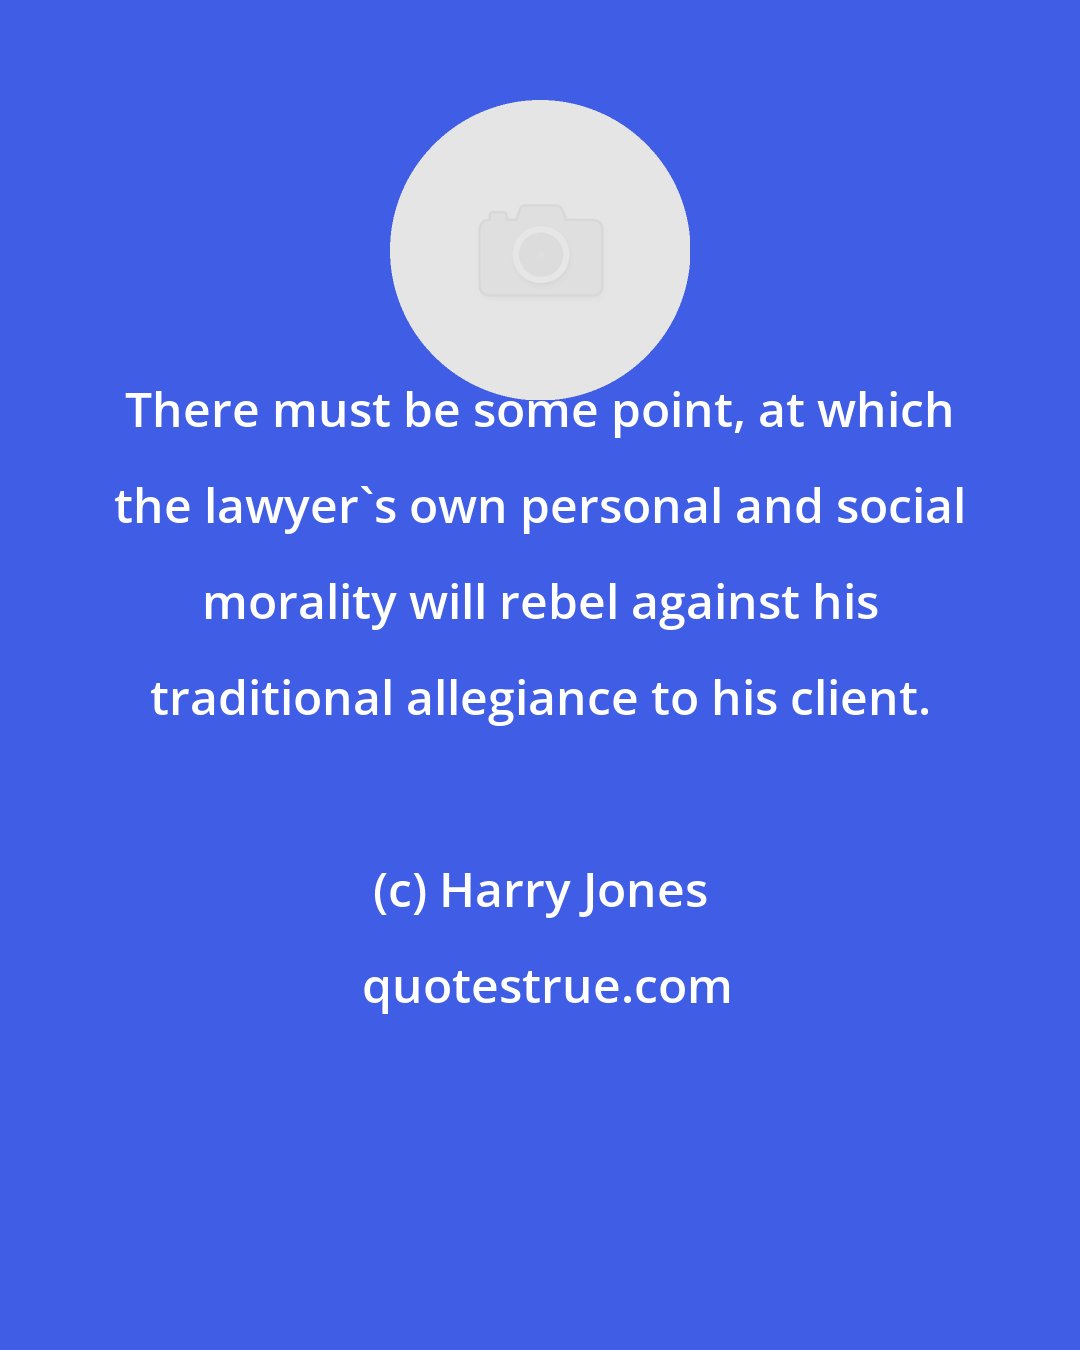 Harry Jones: There must be some point, at which the lawyer's own personal and social morality will rebel against his traditional allegiance to his client.